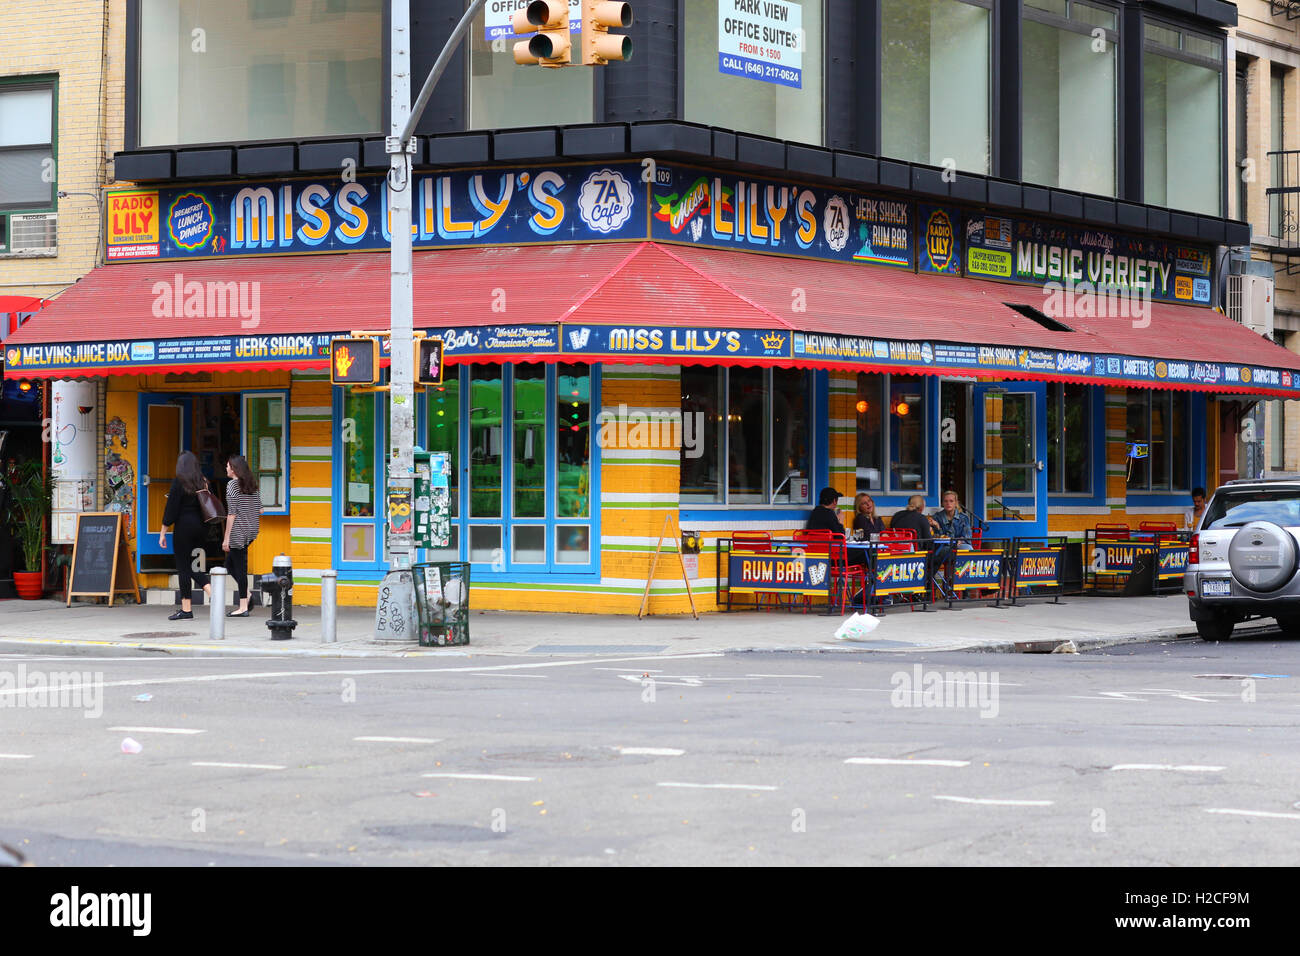 Miss Lily's 7A Cafe, 109 Avenue A, New York, NY. exterior storefront of a Jamaican restaurant in the East Village neighborhood of Manhattan. Stock Photo